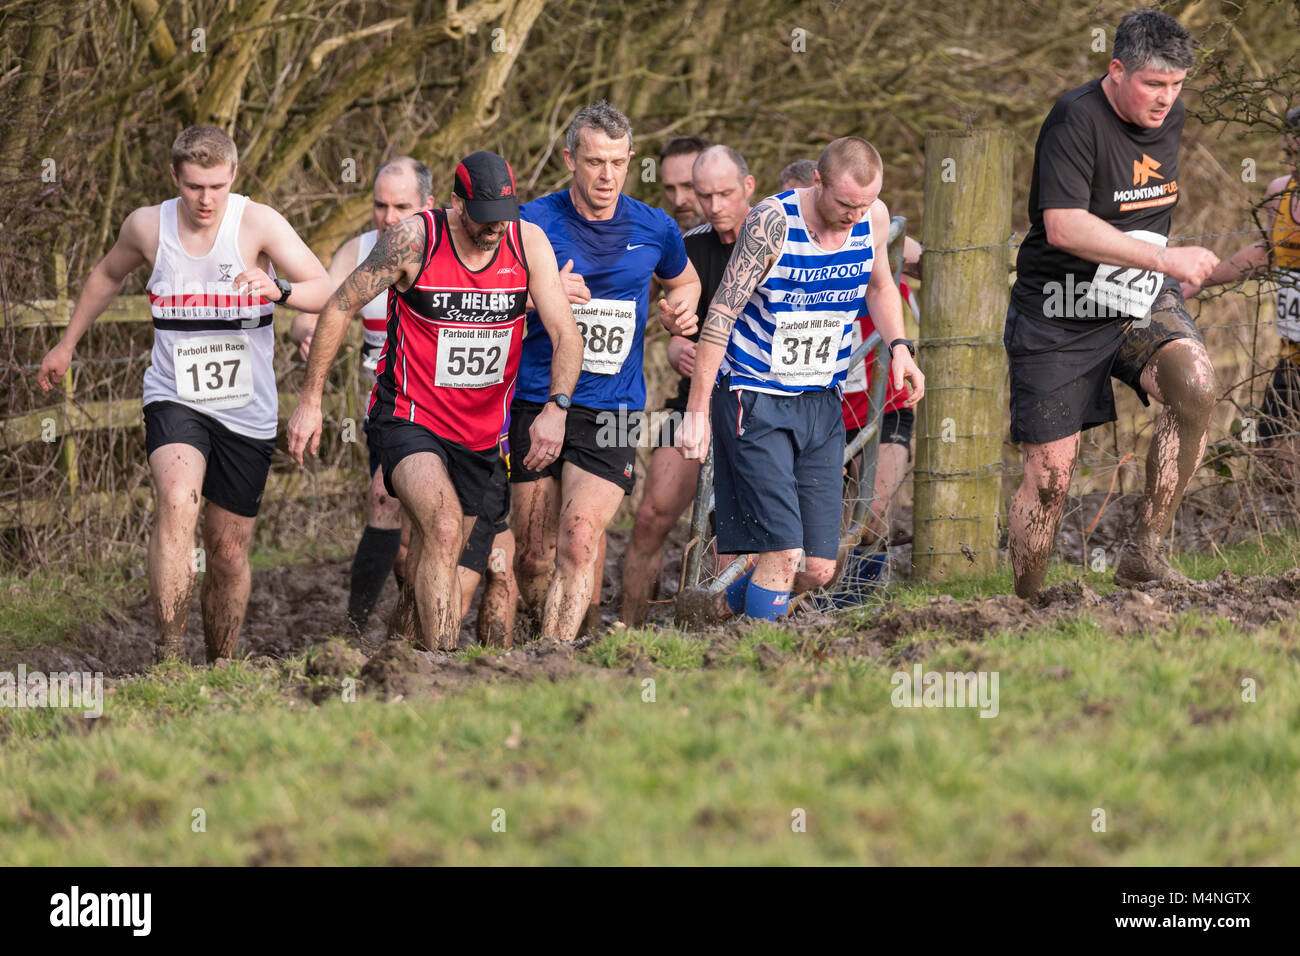 Lancashire, UK. 17th Feb, 2018. Skelmersdale Boundary Harriers organized the the 48th PARBOLD HILL RACE today, Saturday 17 Feb 2018 The race started at 2:00pm. over 6.75 miles multi terrain. The start/finish was at Richard Durning's Endowed Primary School,. Chorley Rd, Bispham, Nr. Parbold. Conditions were very muddy in West Lancashire this afternoon, although the race took place in nice sunshine. Credit: Dave McAleavy Images/Alamy Live News Stock Photo